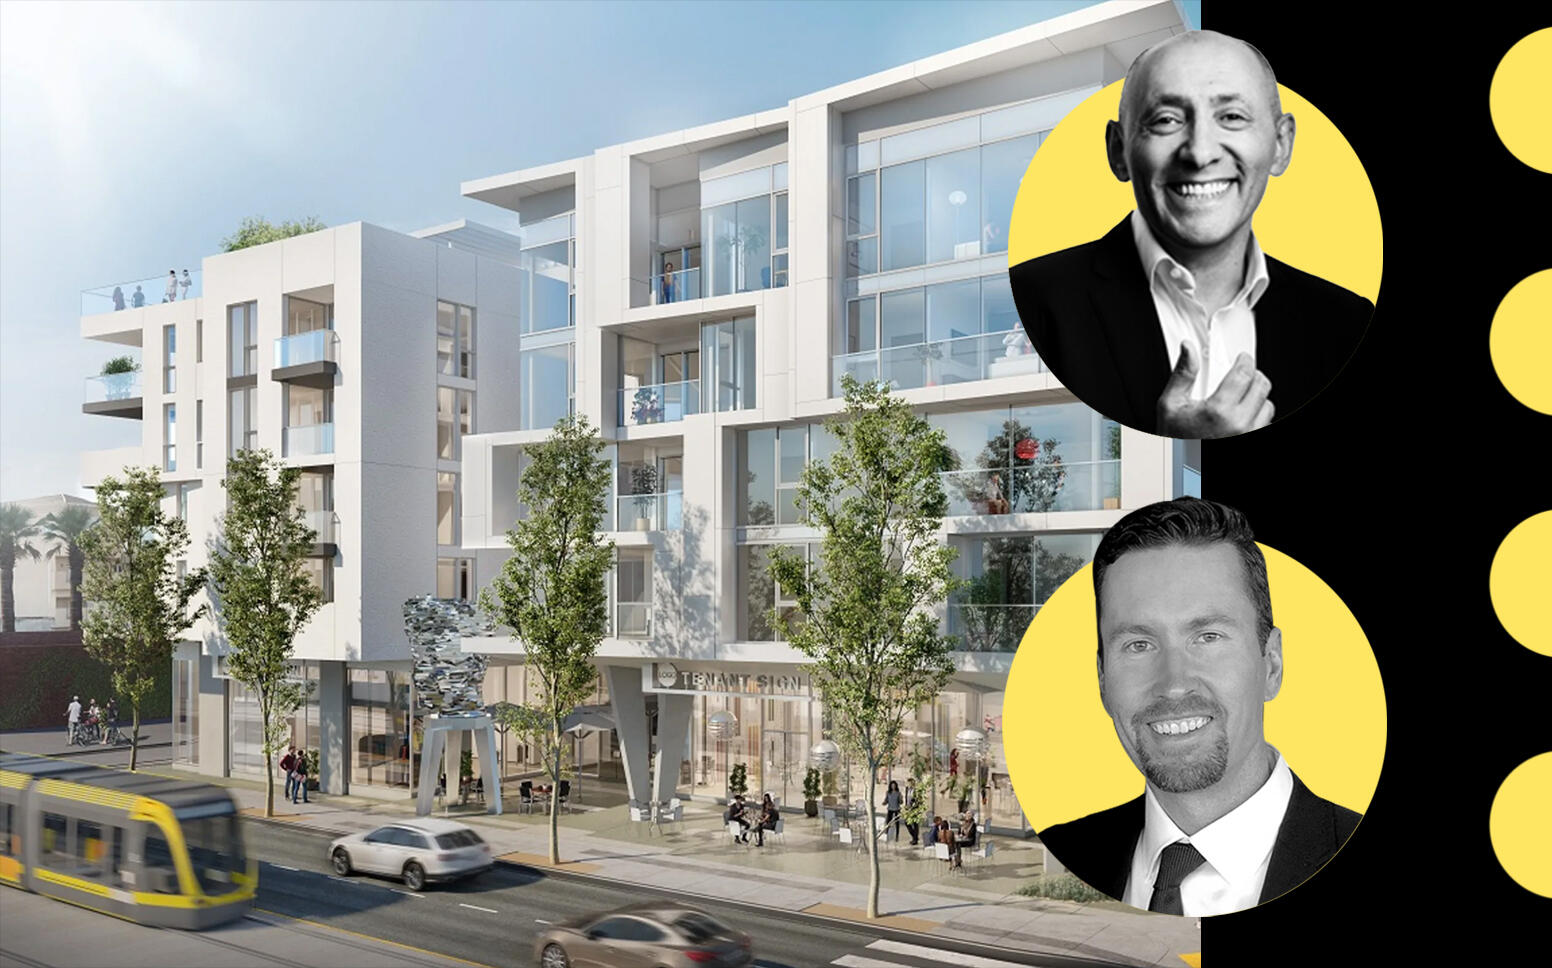 Neil Shekhter, WS Communities CEO Scott Walter and 1550 Lincoln Boulevard